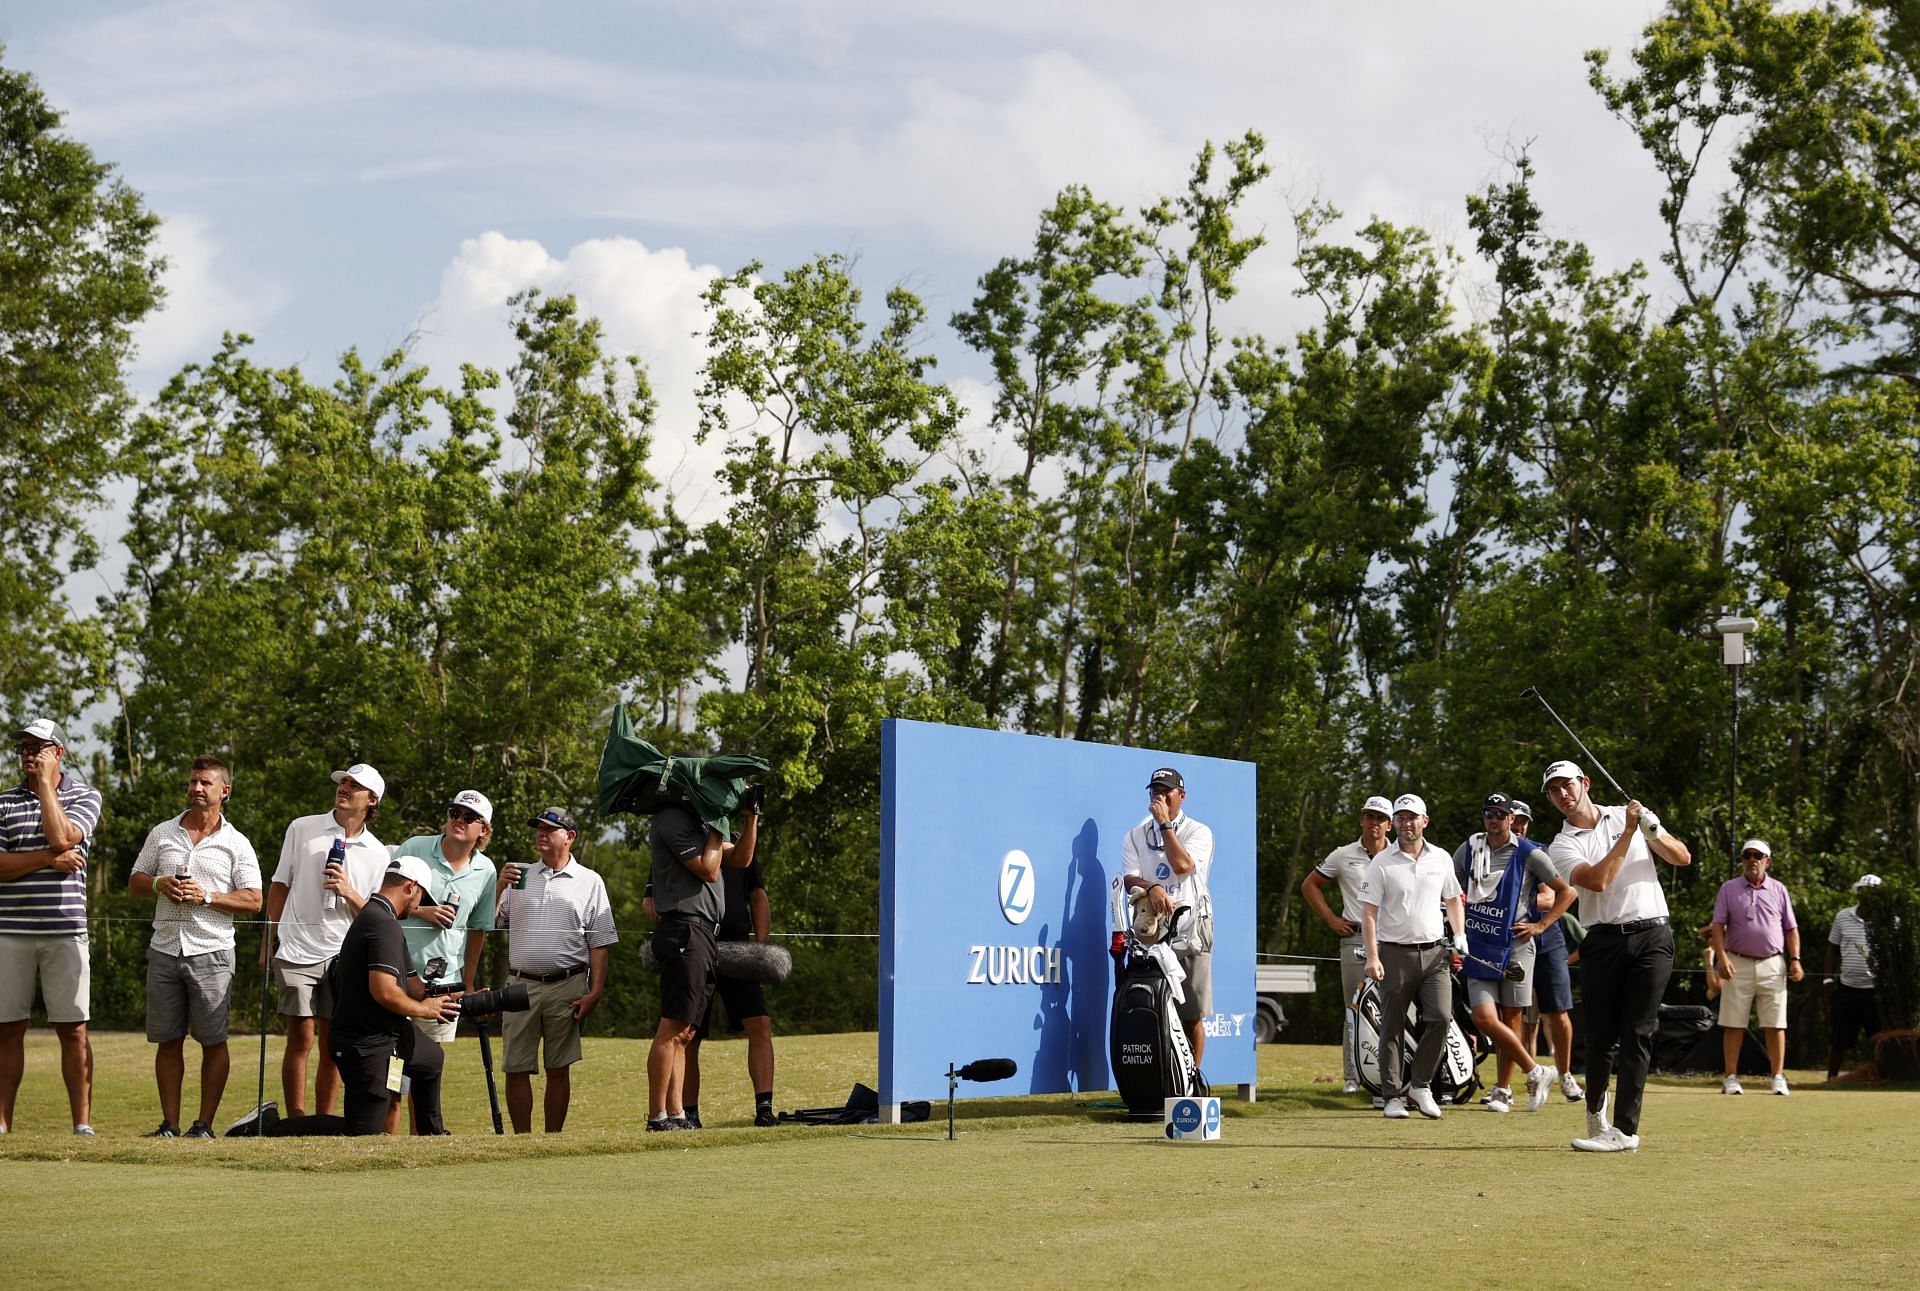 Zurich Classic of New Orleans Schedule, players, total prize purse, and more